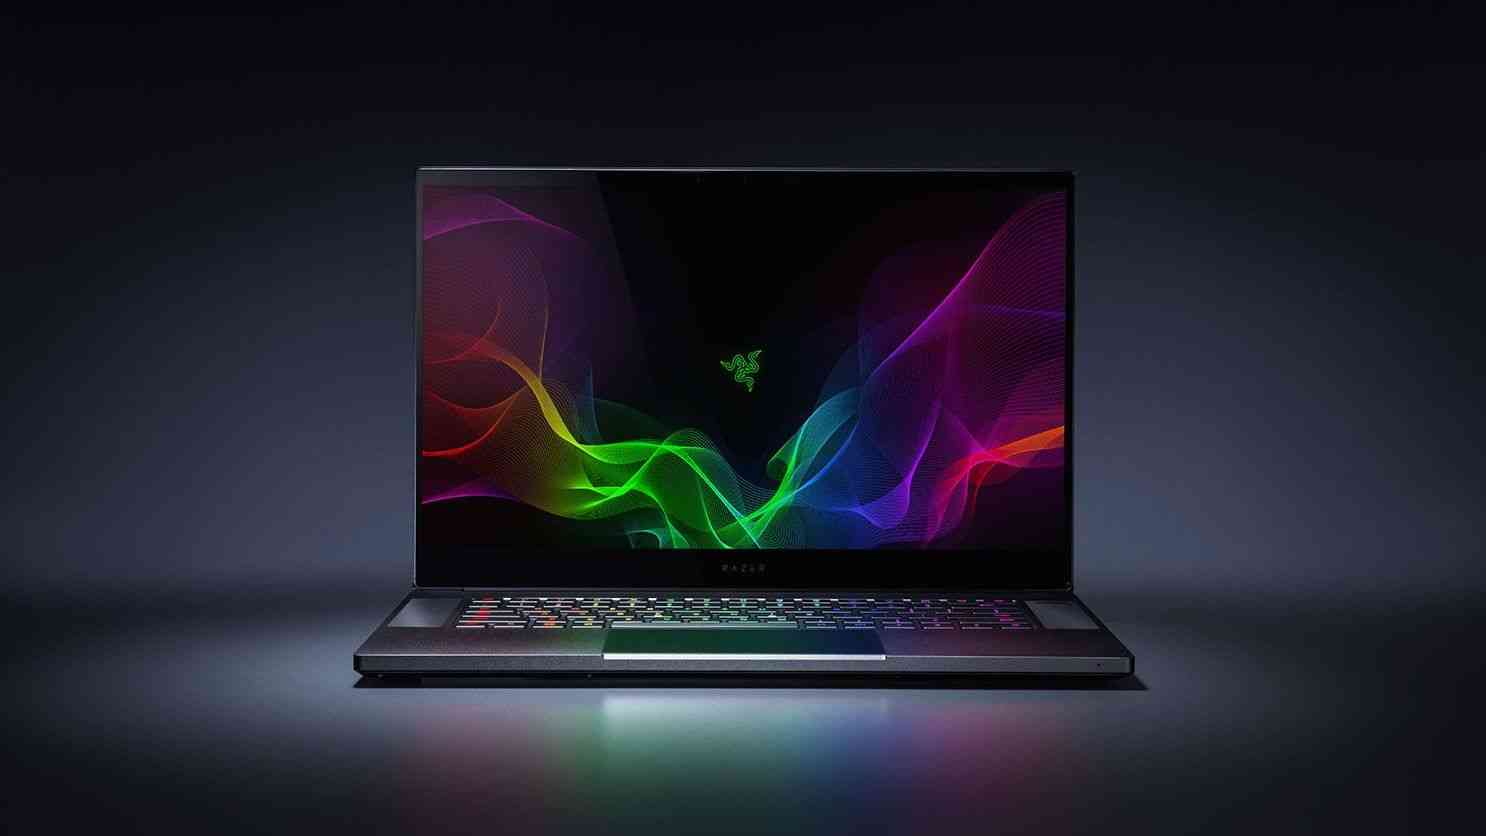 razer is announced smallest laptop powered with rtx 2080 1266 big 1